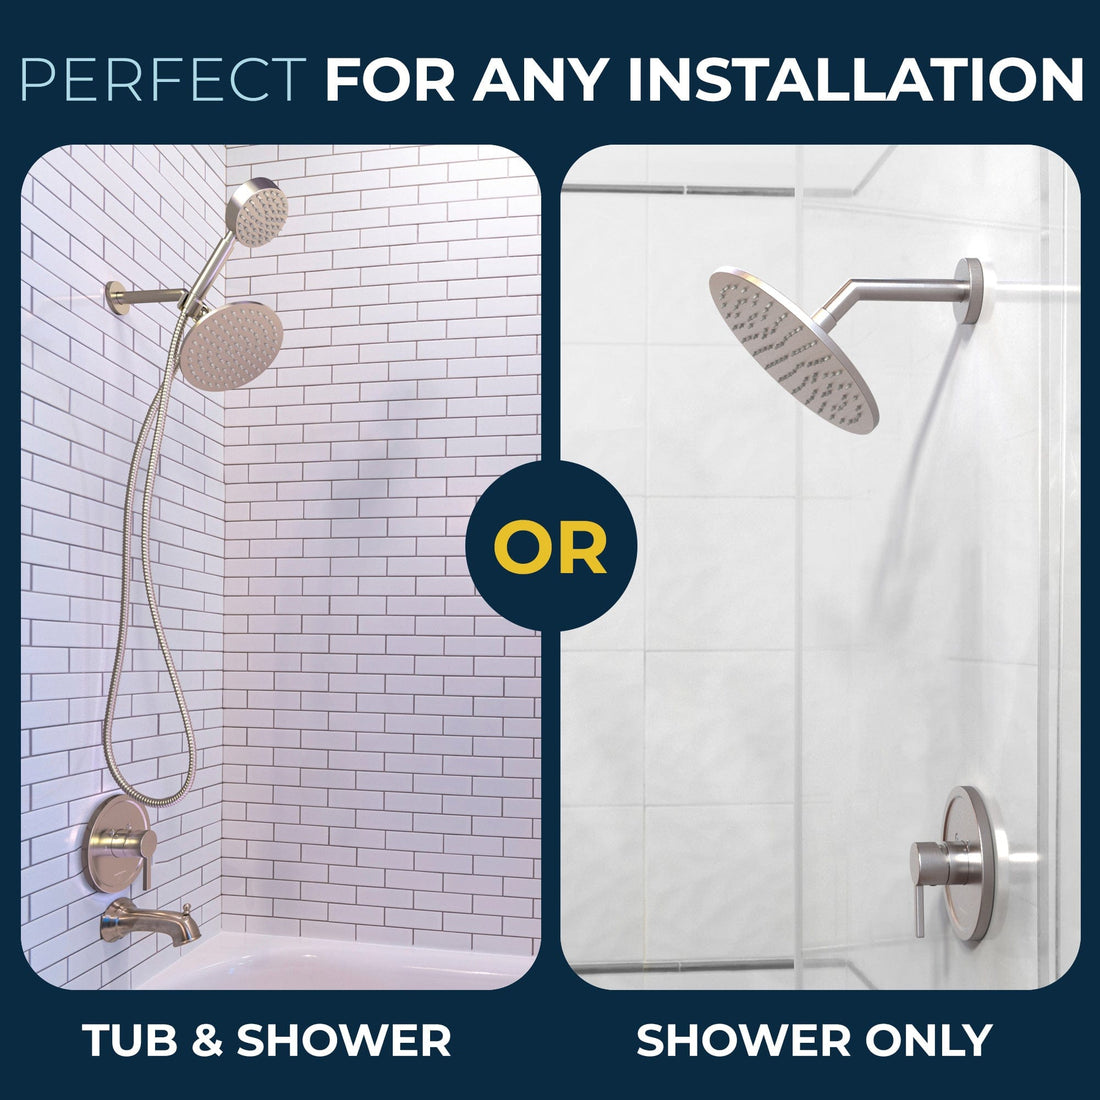 Works for Tub and Shower or Shower Only - All Metal 1-Handle Tub and Shower Valve with Trim Kit Chrome - The Shower Head Store